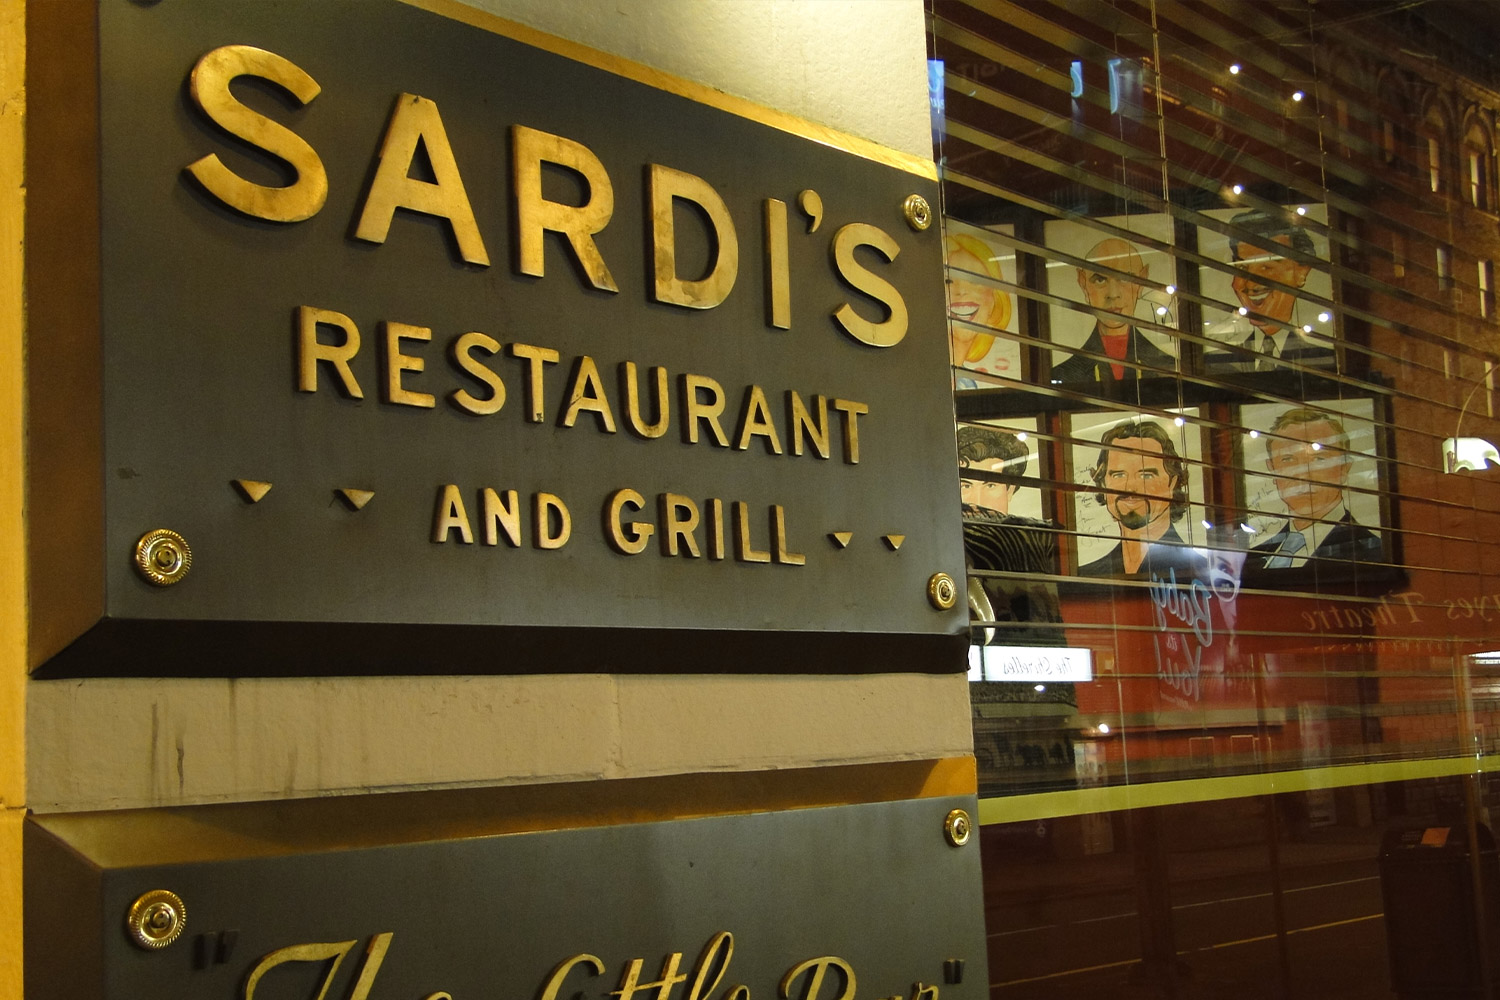 Outdoor sign to Sardi's Restaurant and Grill and caricatures on the wall seen through the window